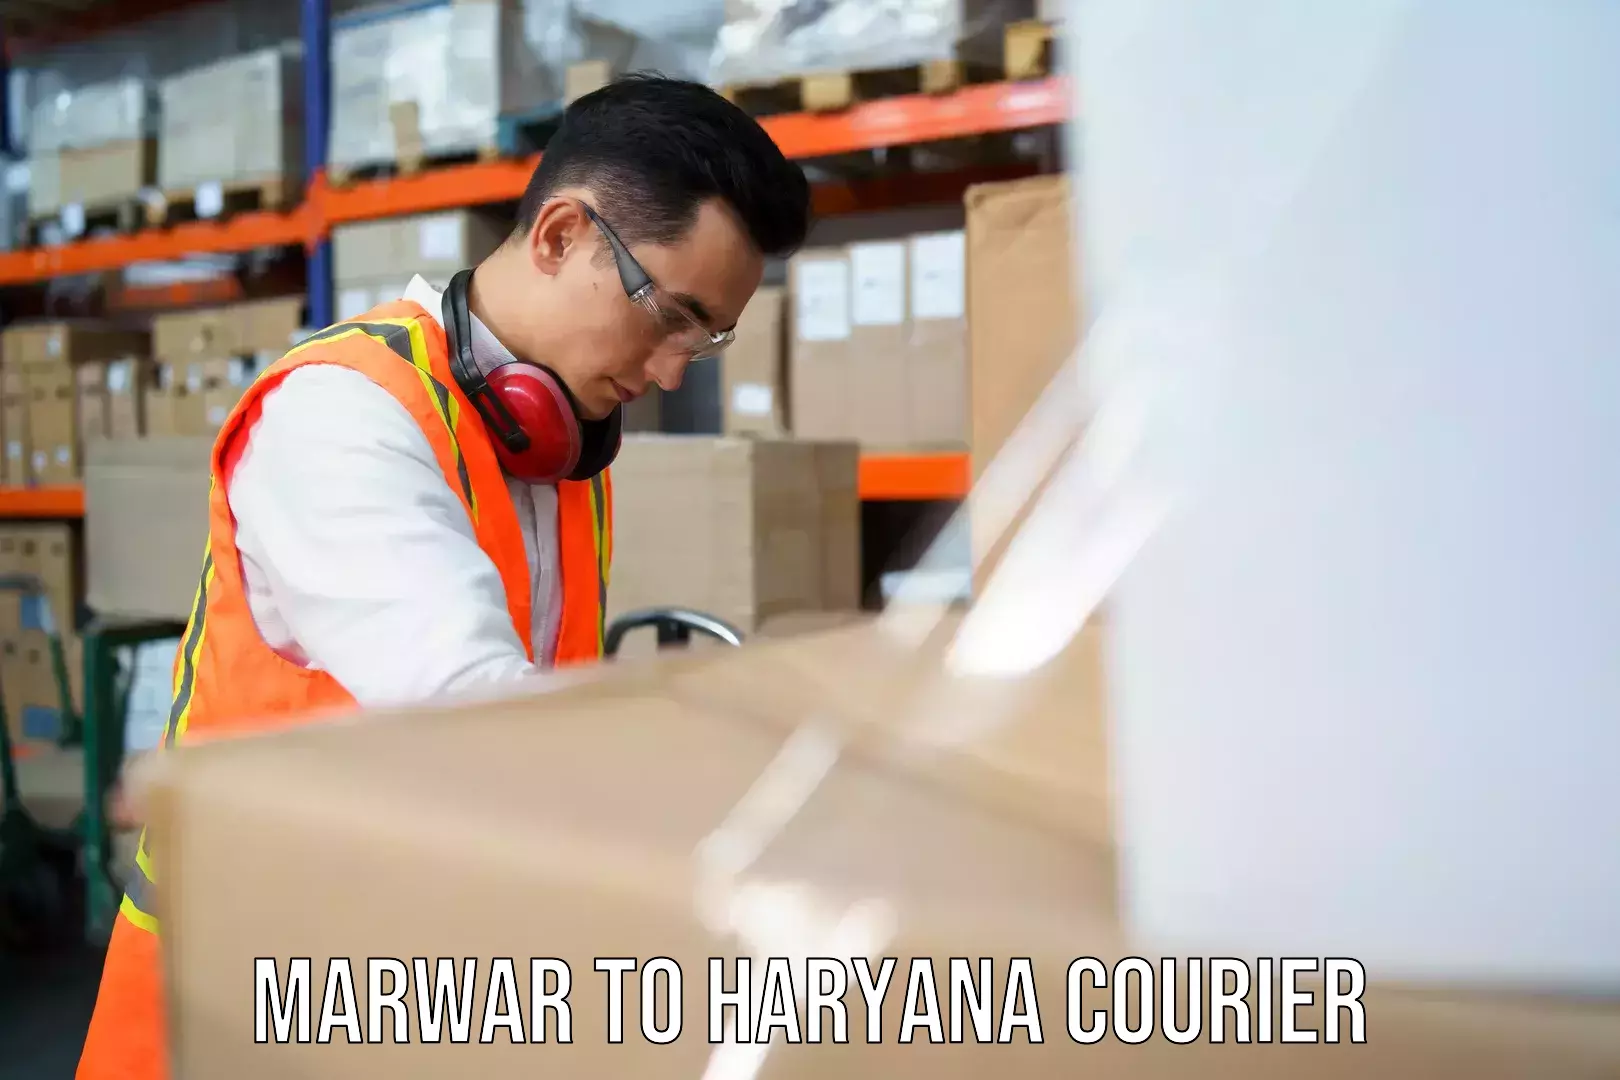 Courier service innovation Marwar to Chirya